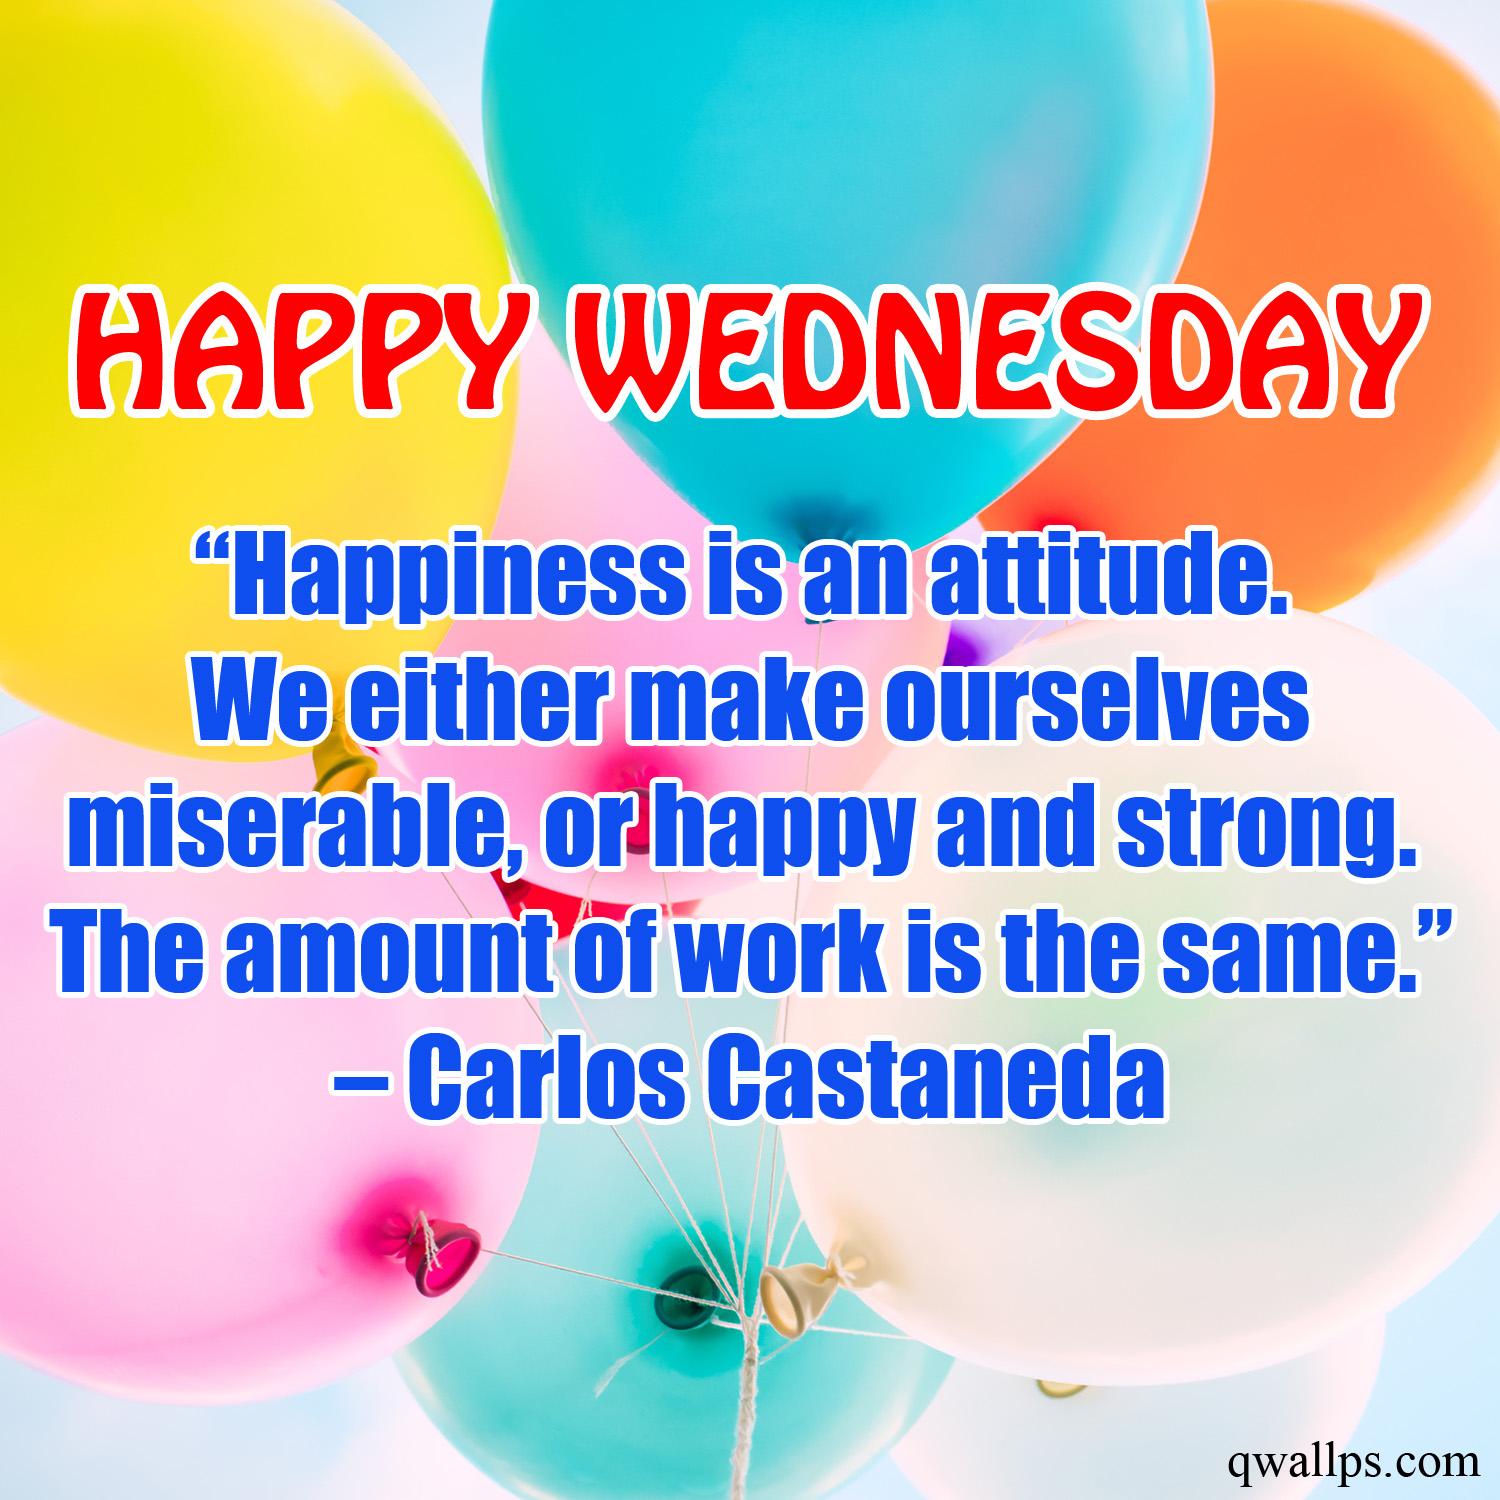 Wednesday Quotes Wallpaper For Pc